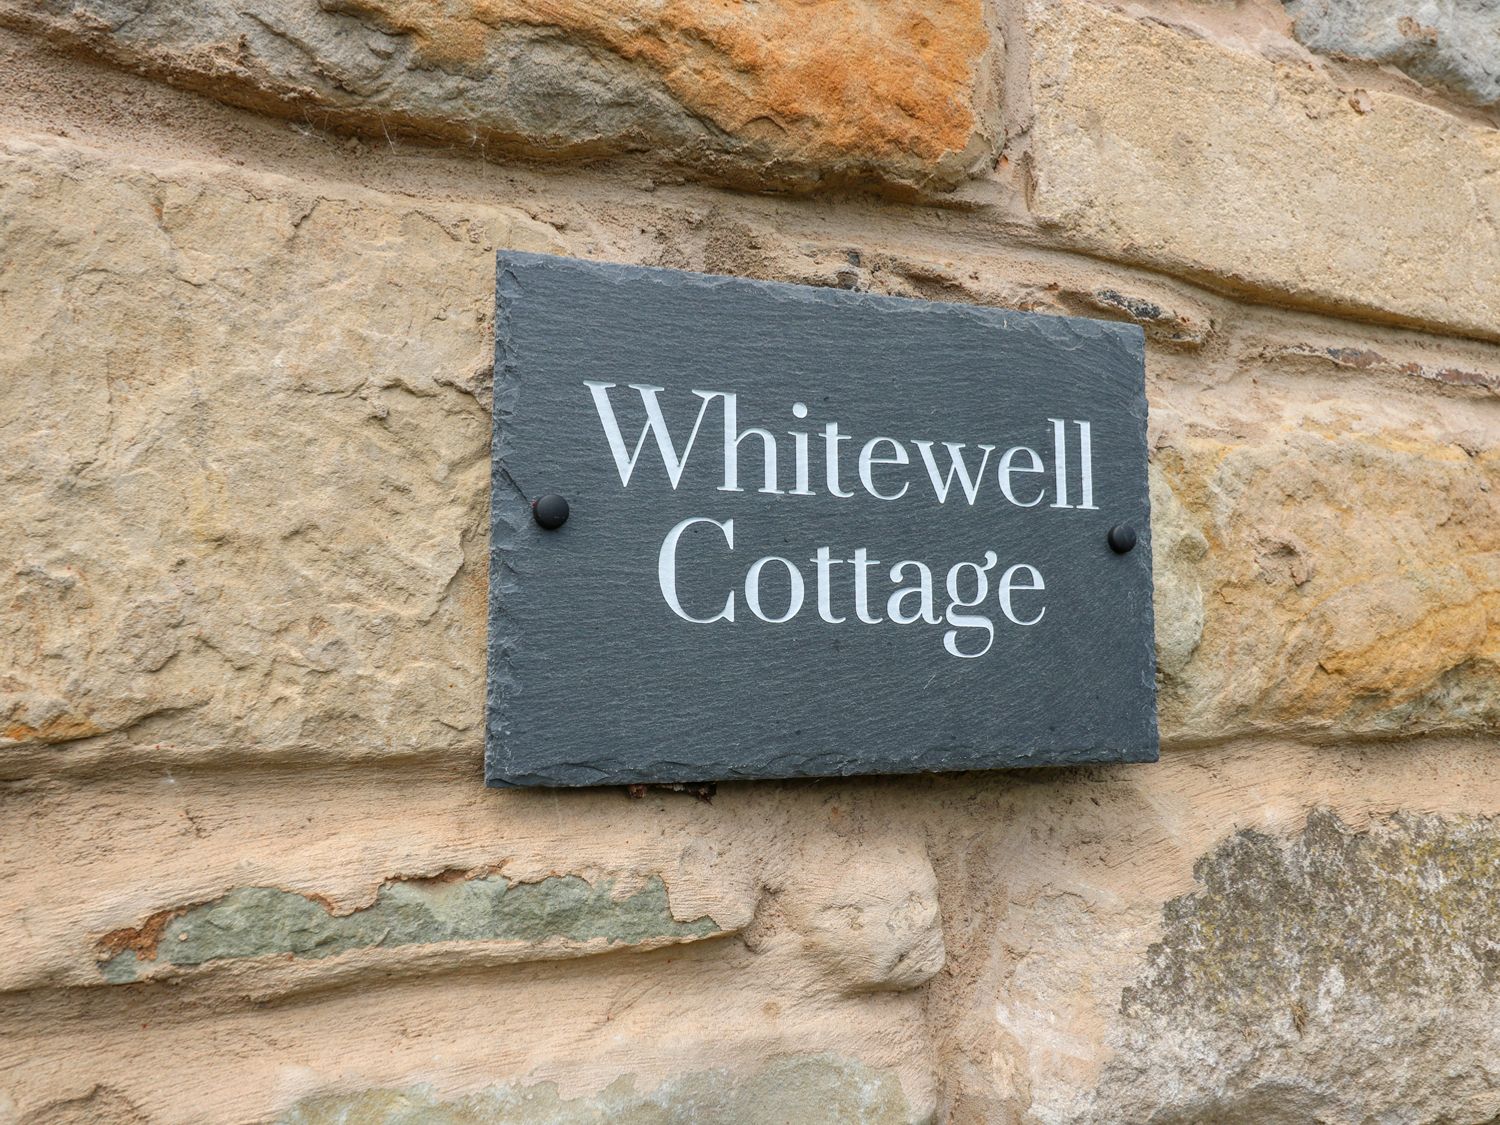 Whitewell Cottage, Ribchester